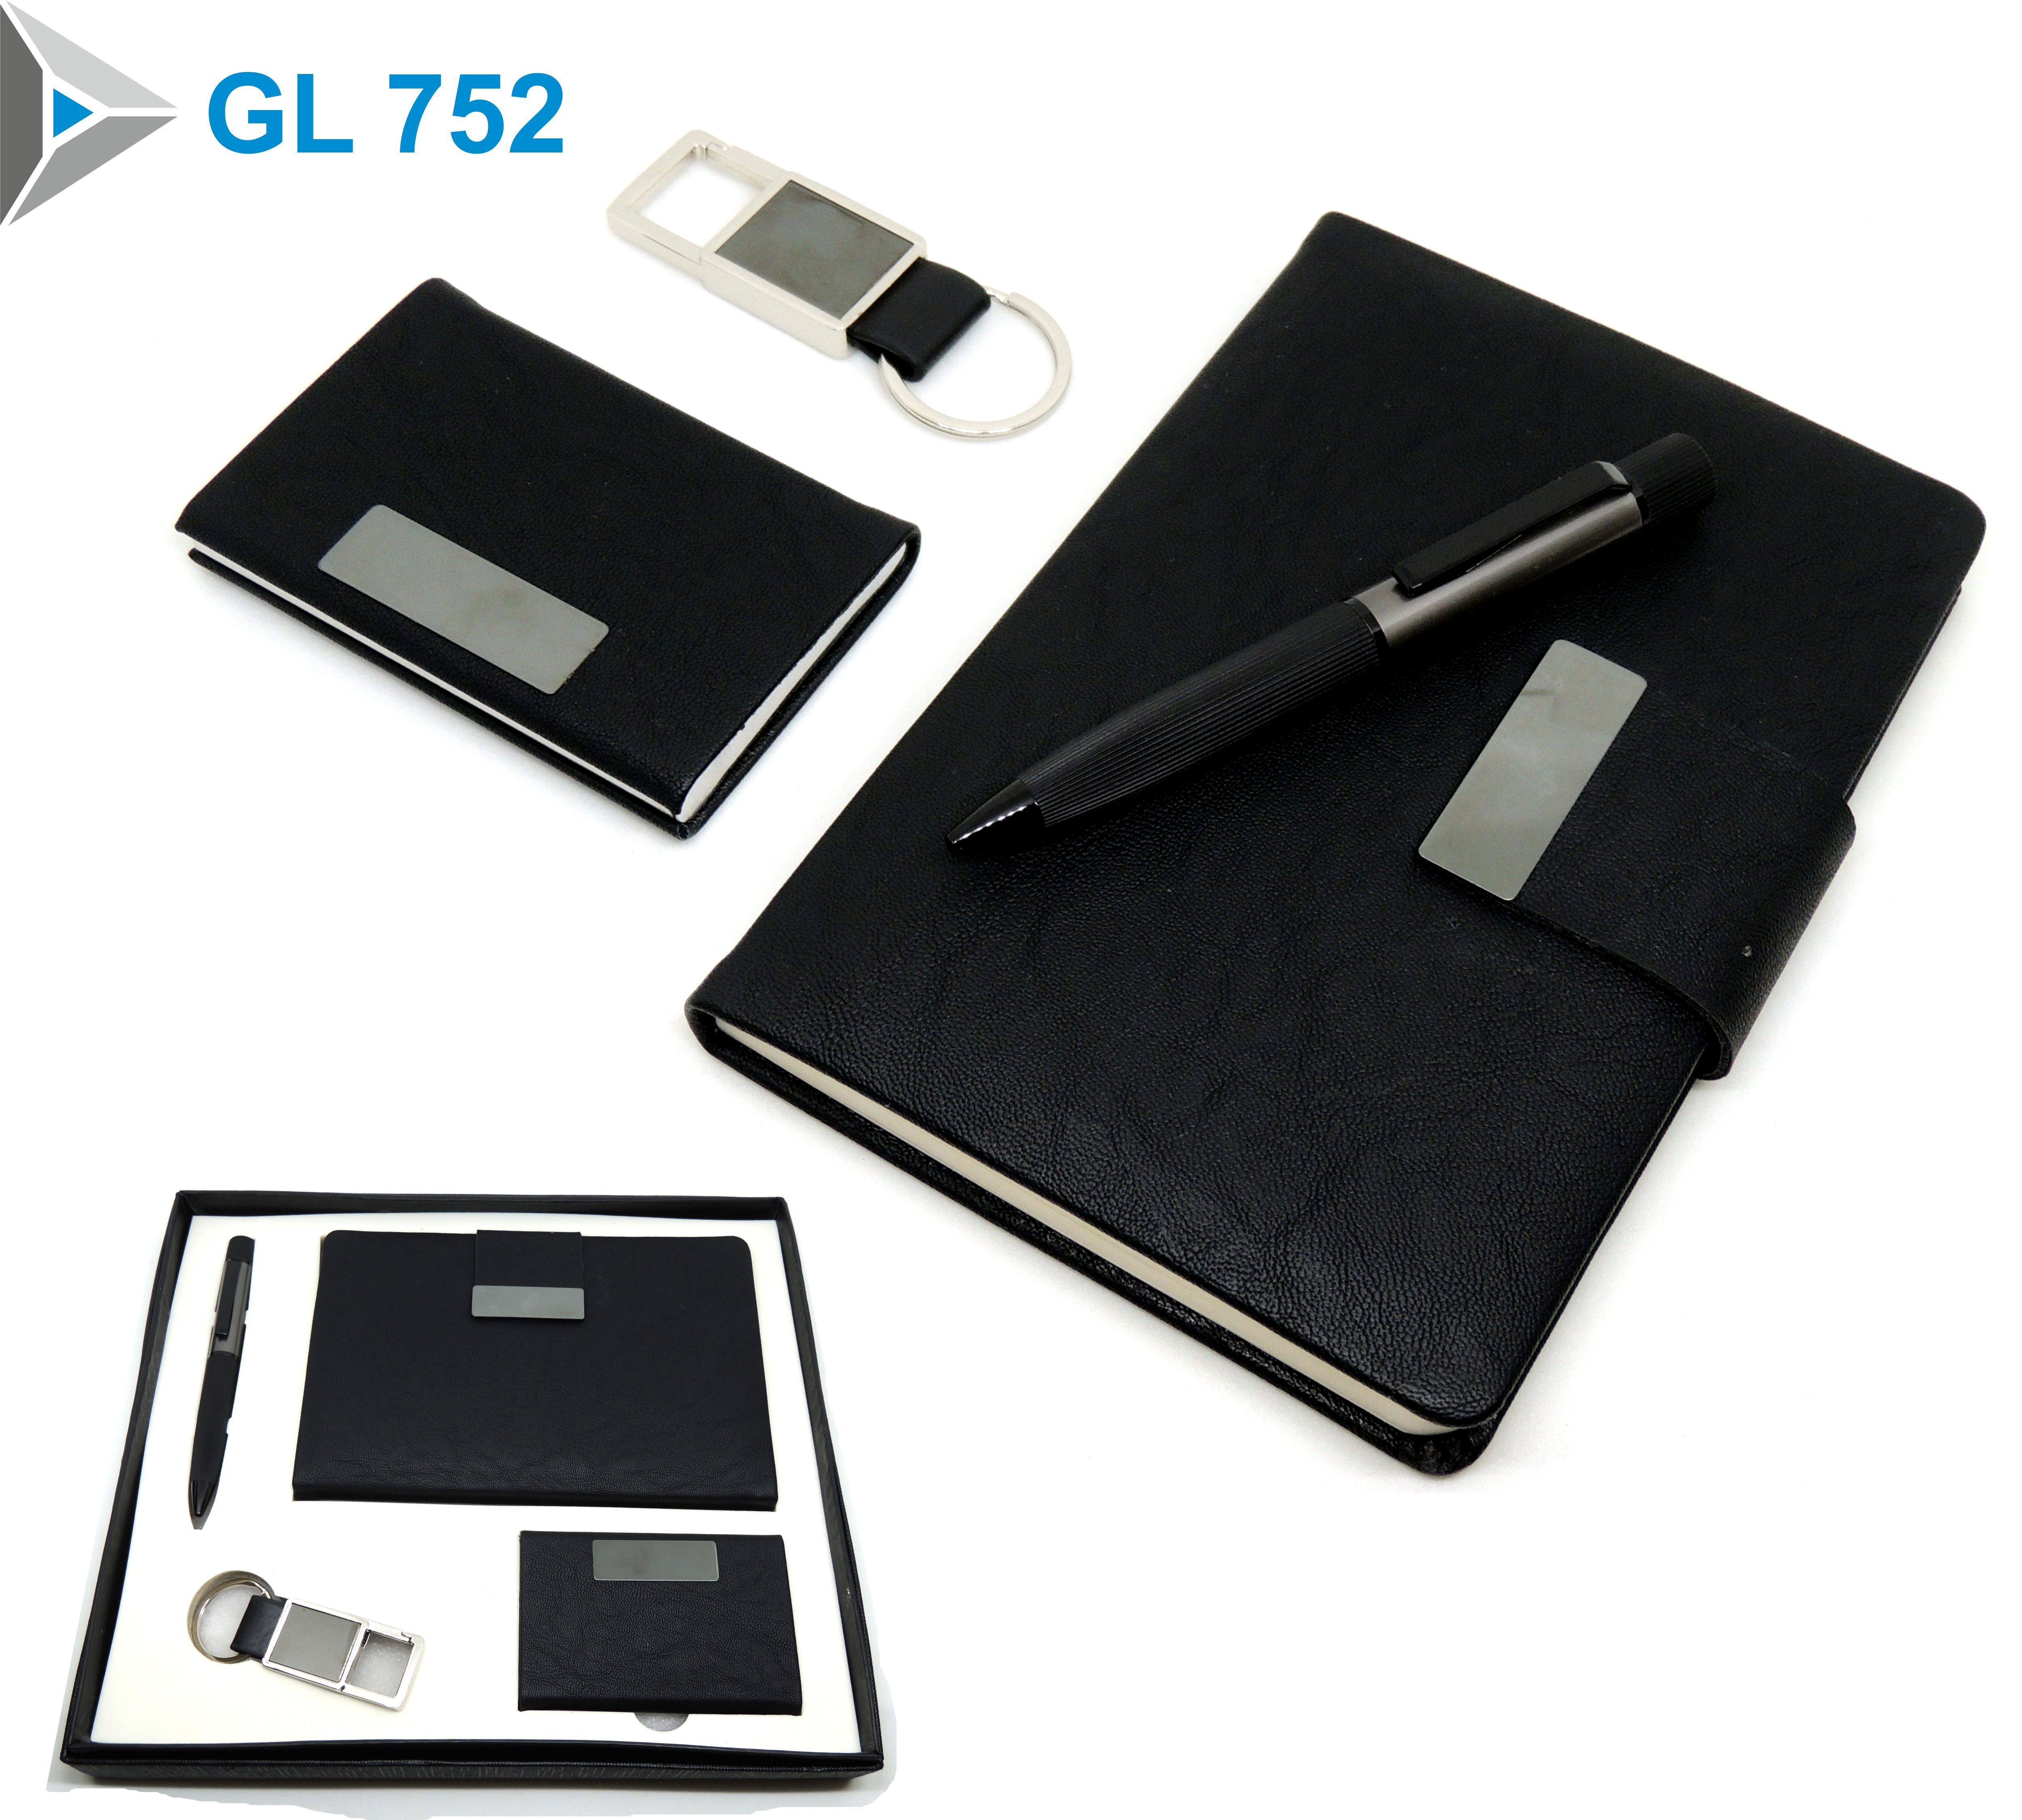 Black Four In One Leather Gift Set